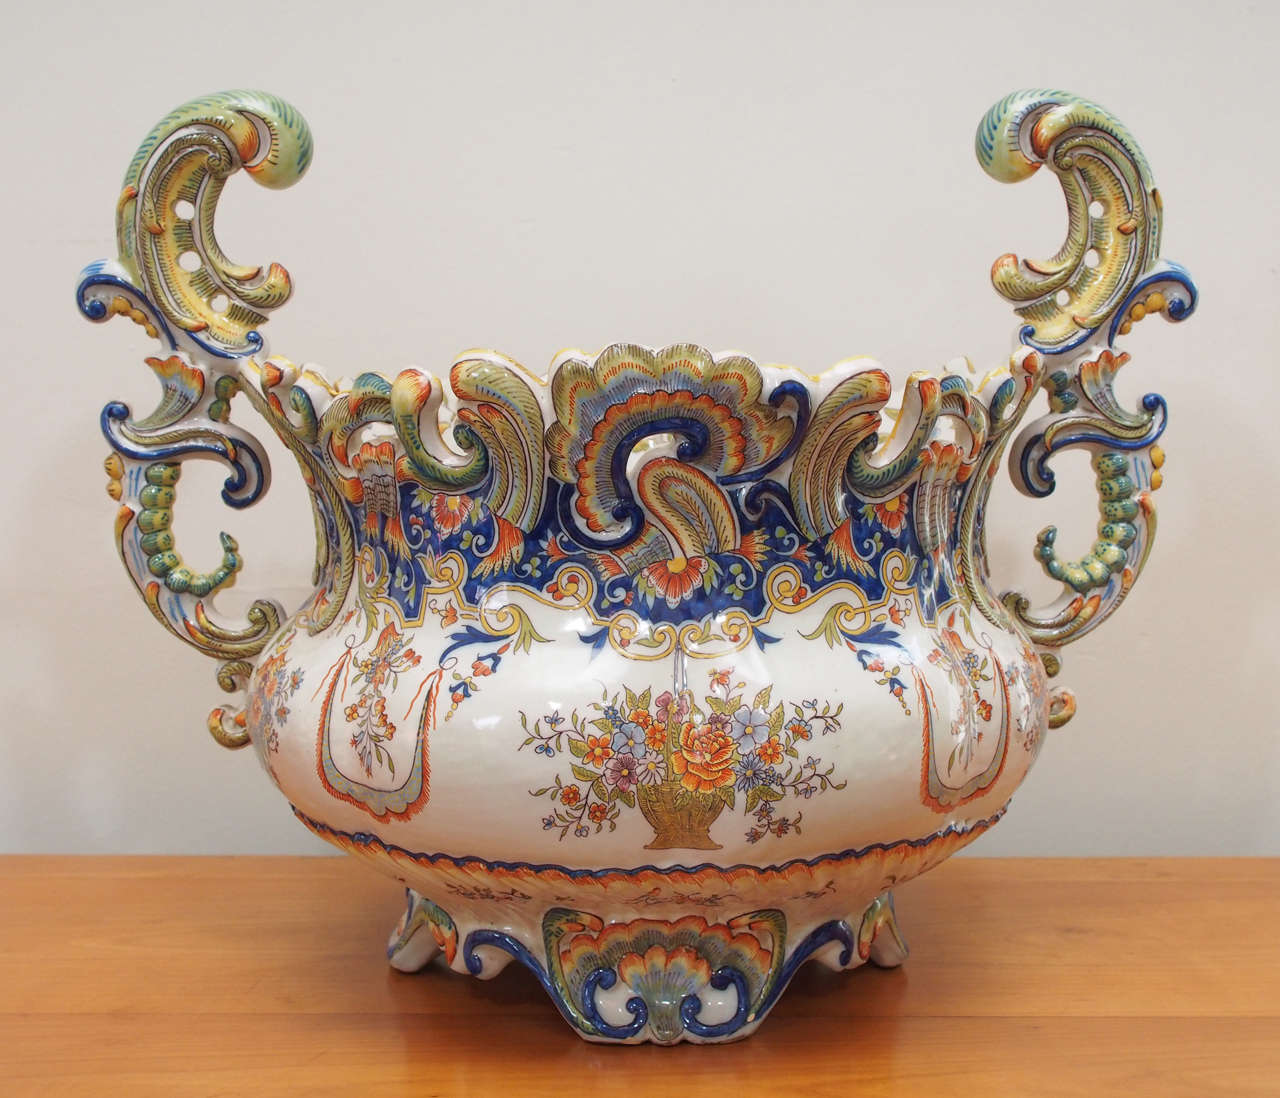 Late 19th century French ceramic bowl with handles.